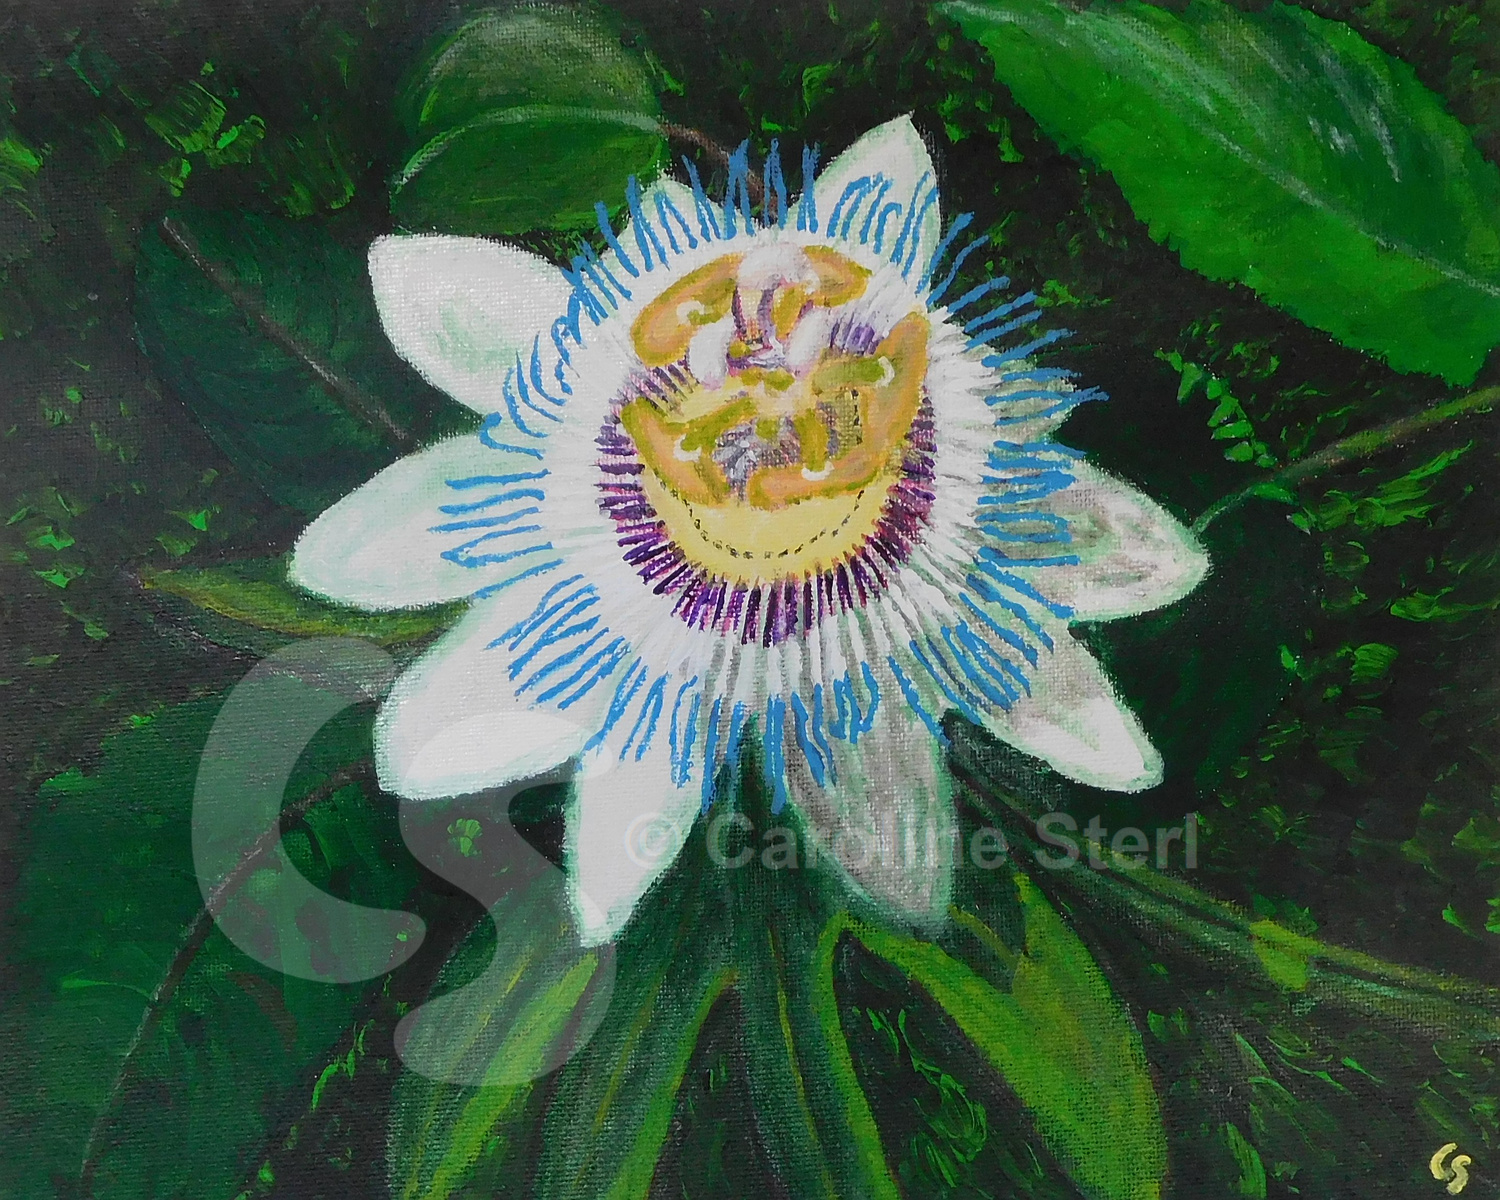 Painting: Passionflower